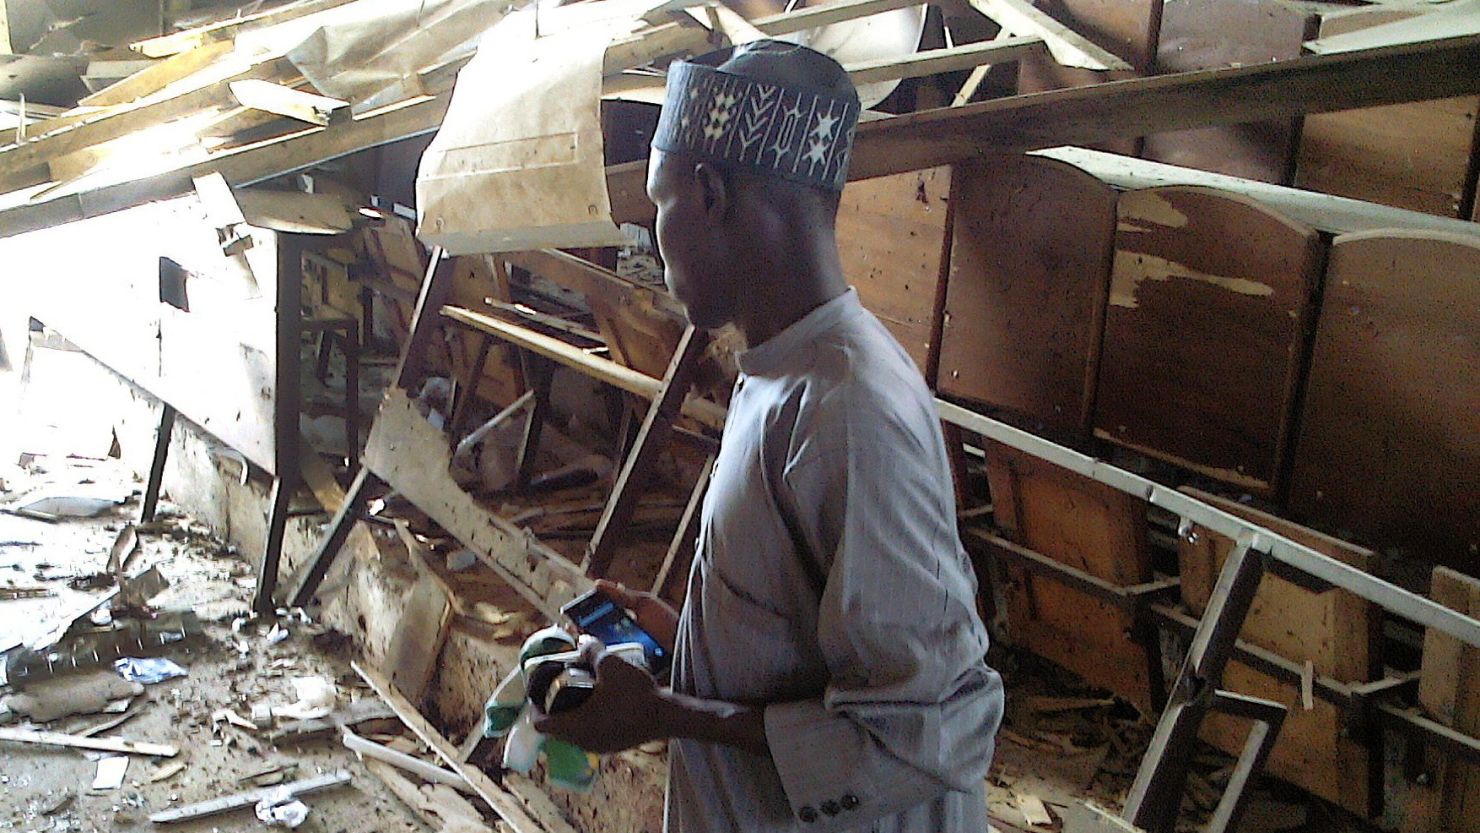 A student looks over at the damage to a lecture hall at the Federal College of Education in the northern Nigerian city of Kano, on September 17, 2014.